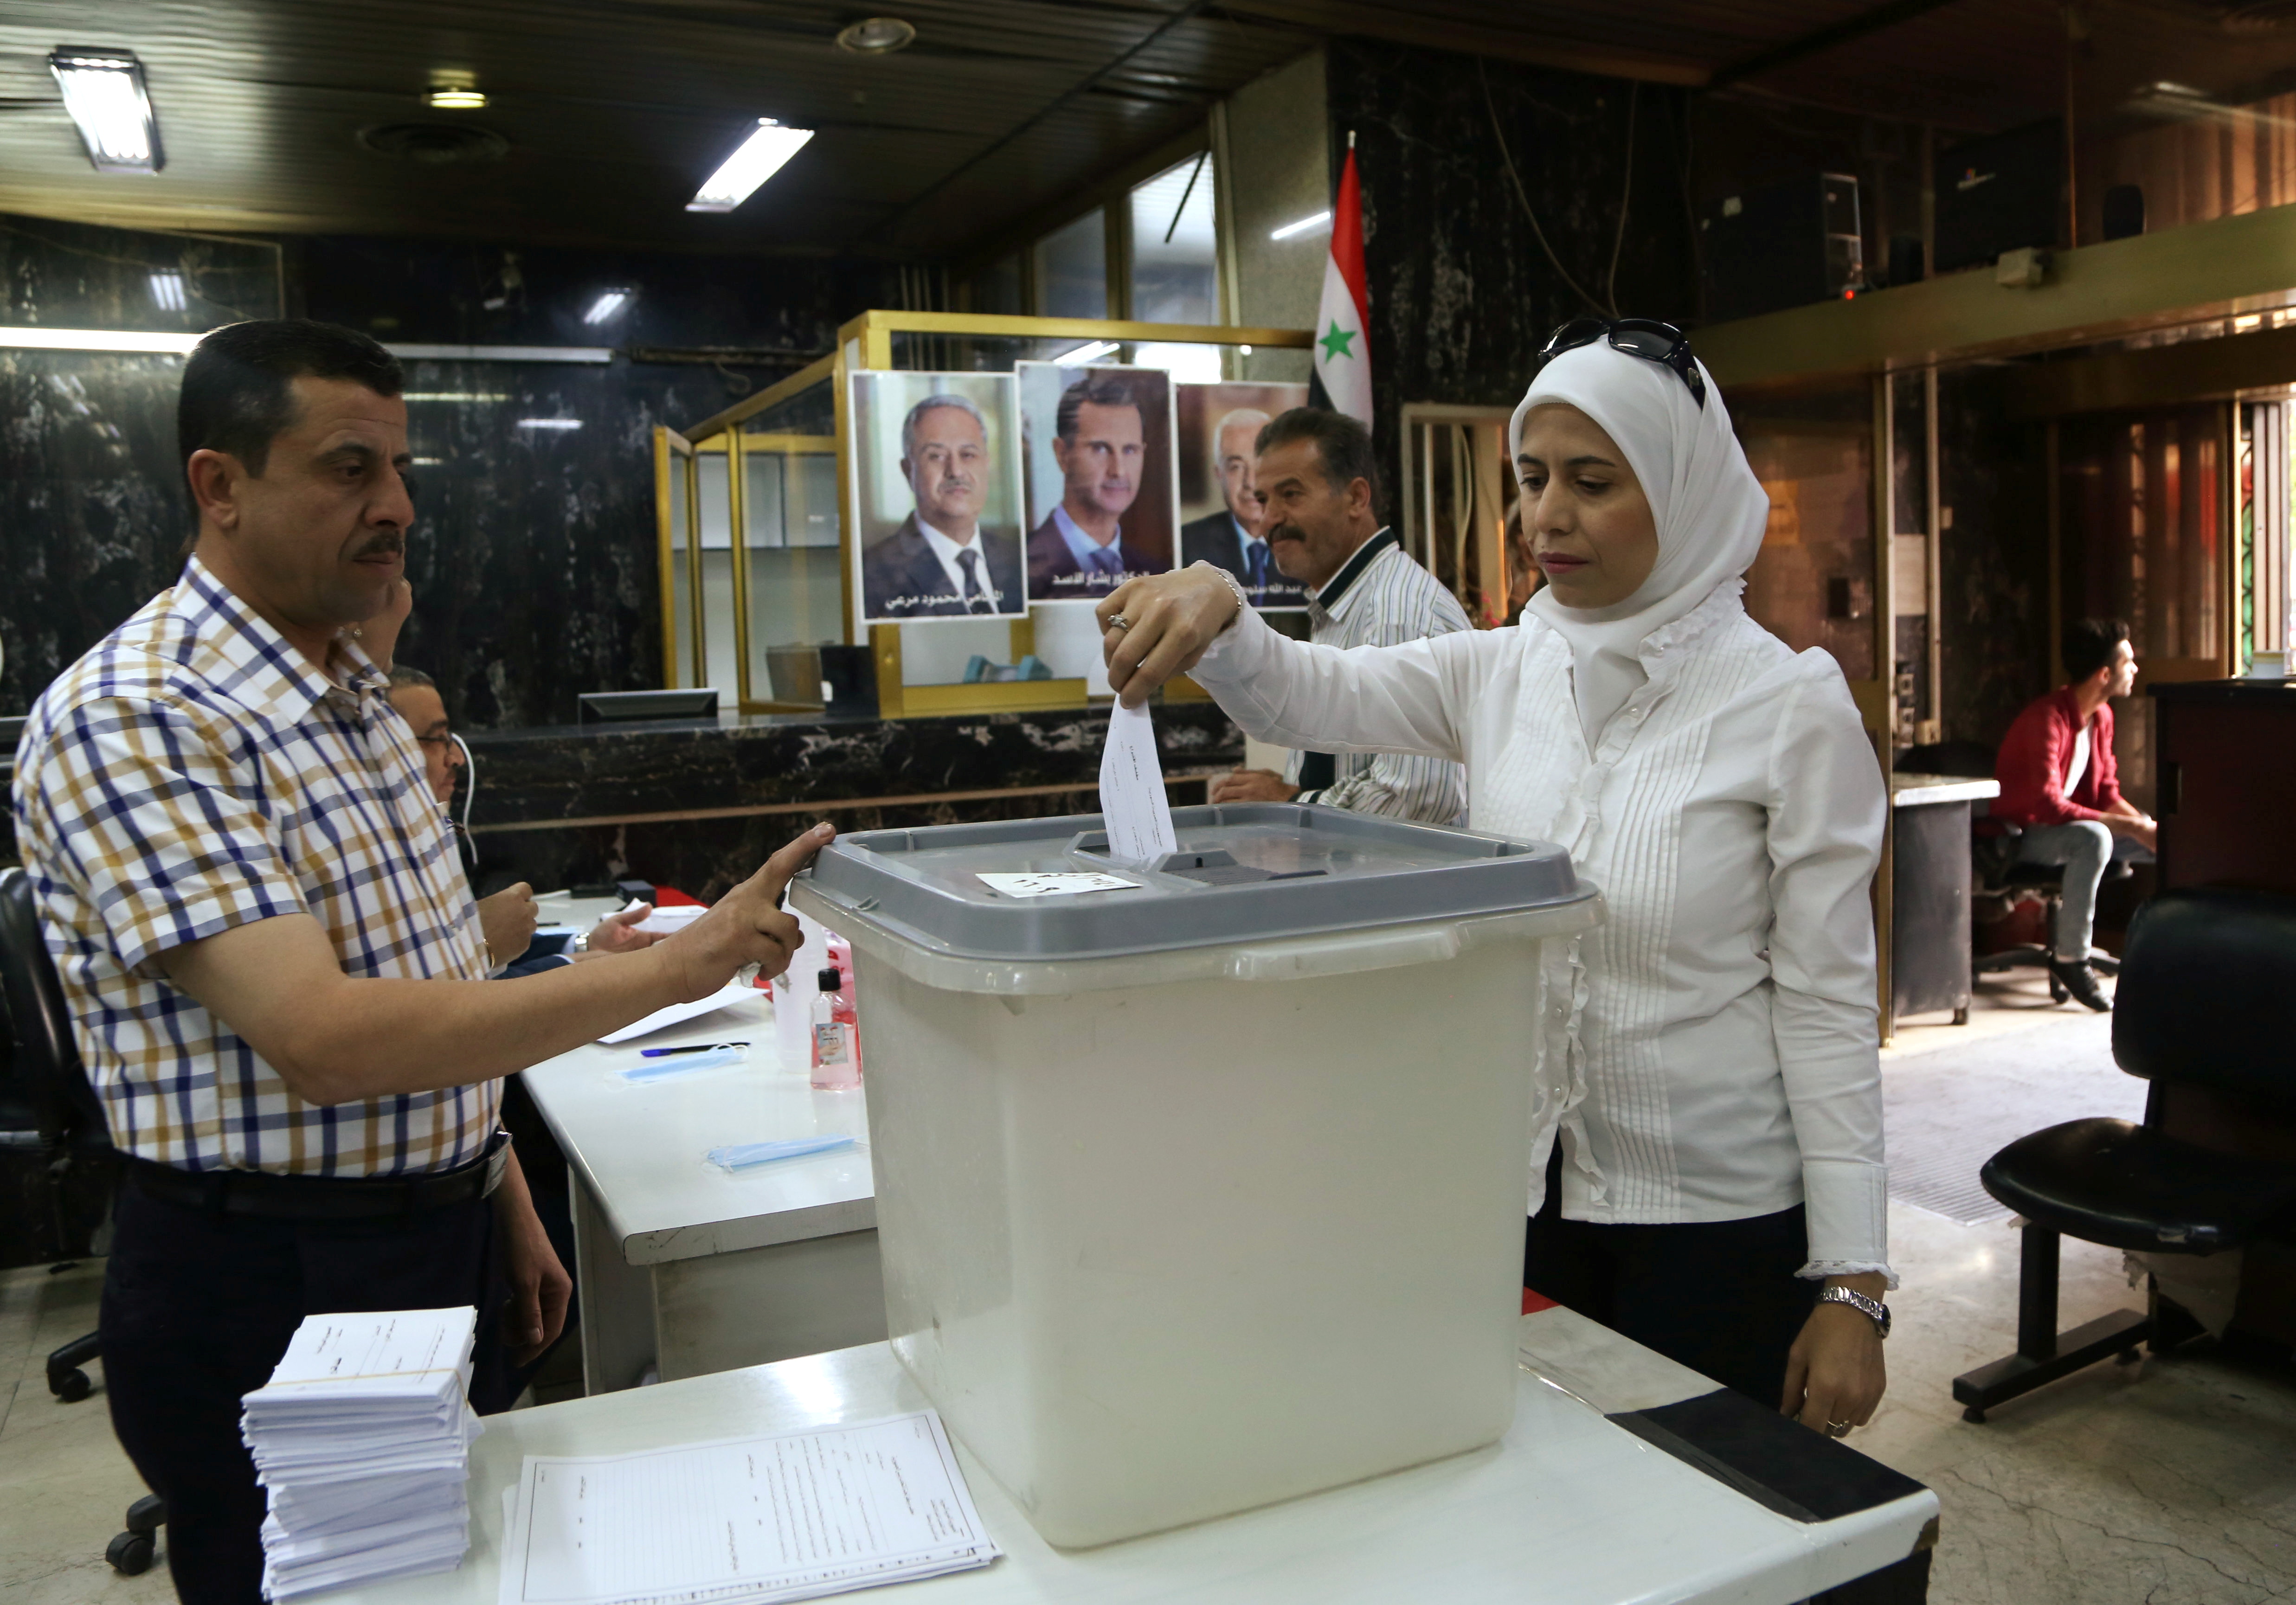 A woman casts her vote at a polling station during the presidential elections in Damascus